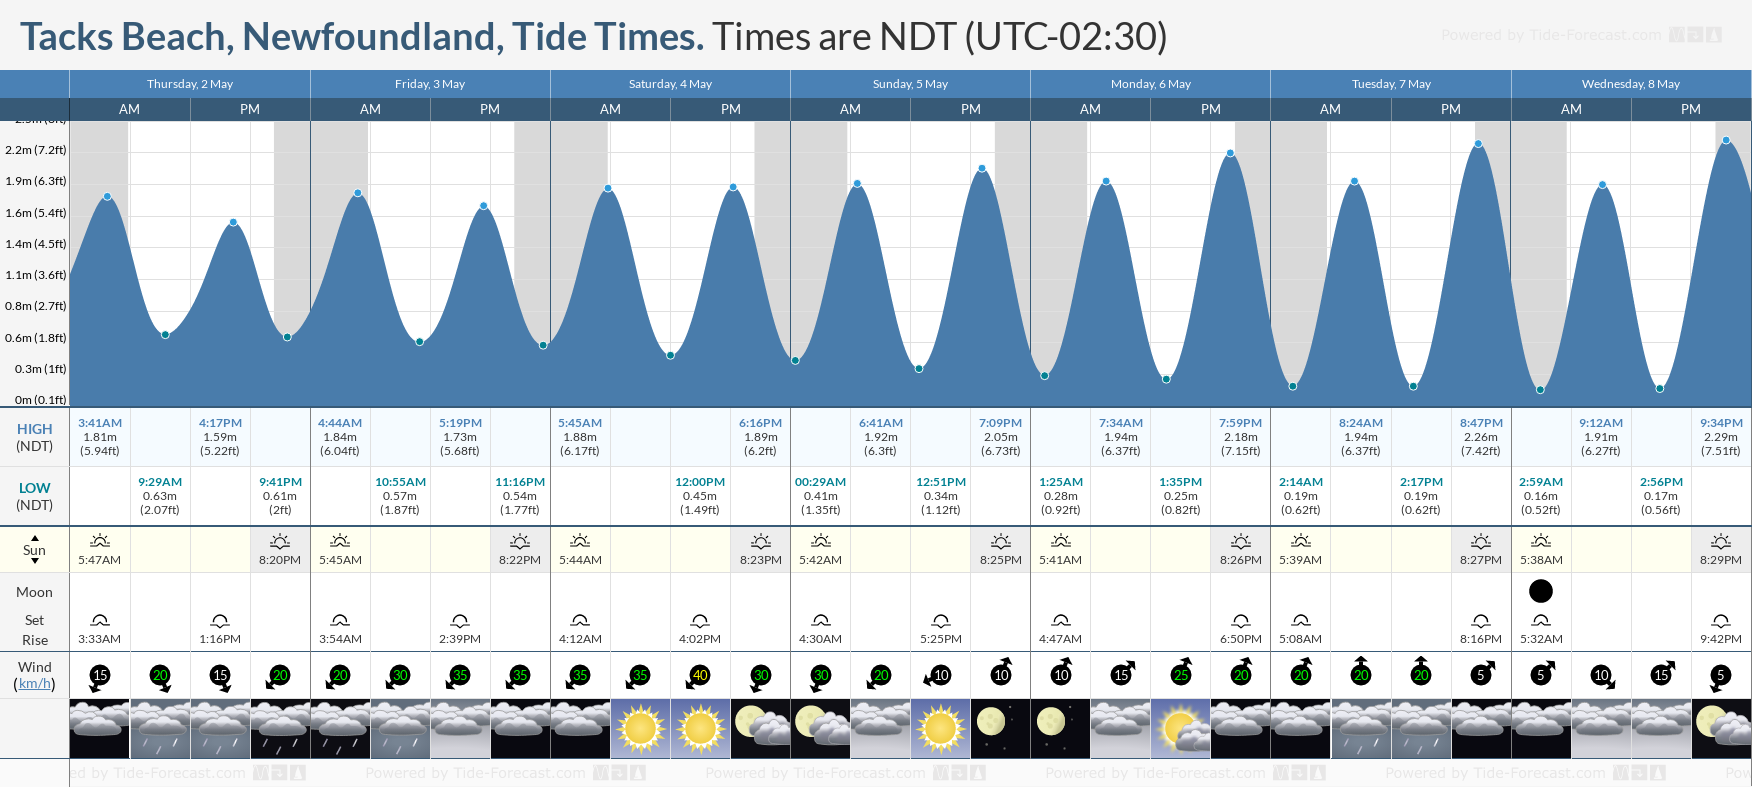 Tacks Beach, Newfoundland Tide Chart including high and low tide tide times for the next 7 days